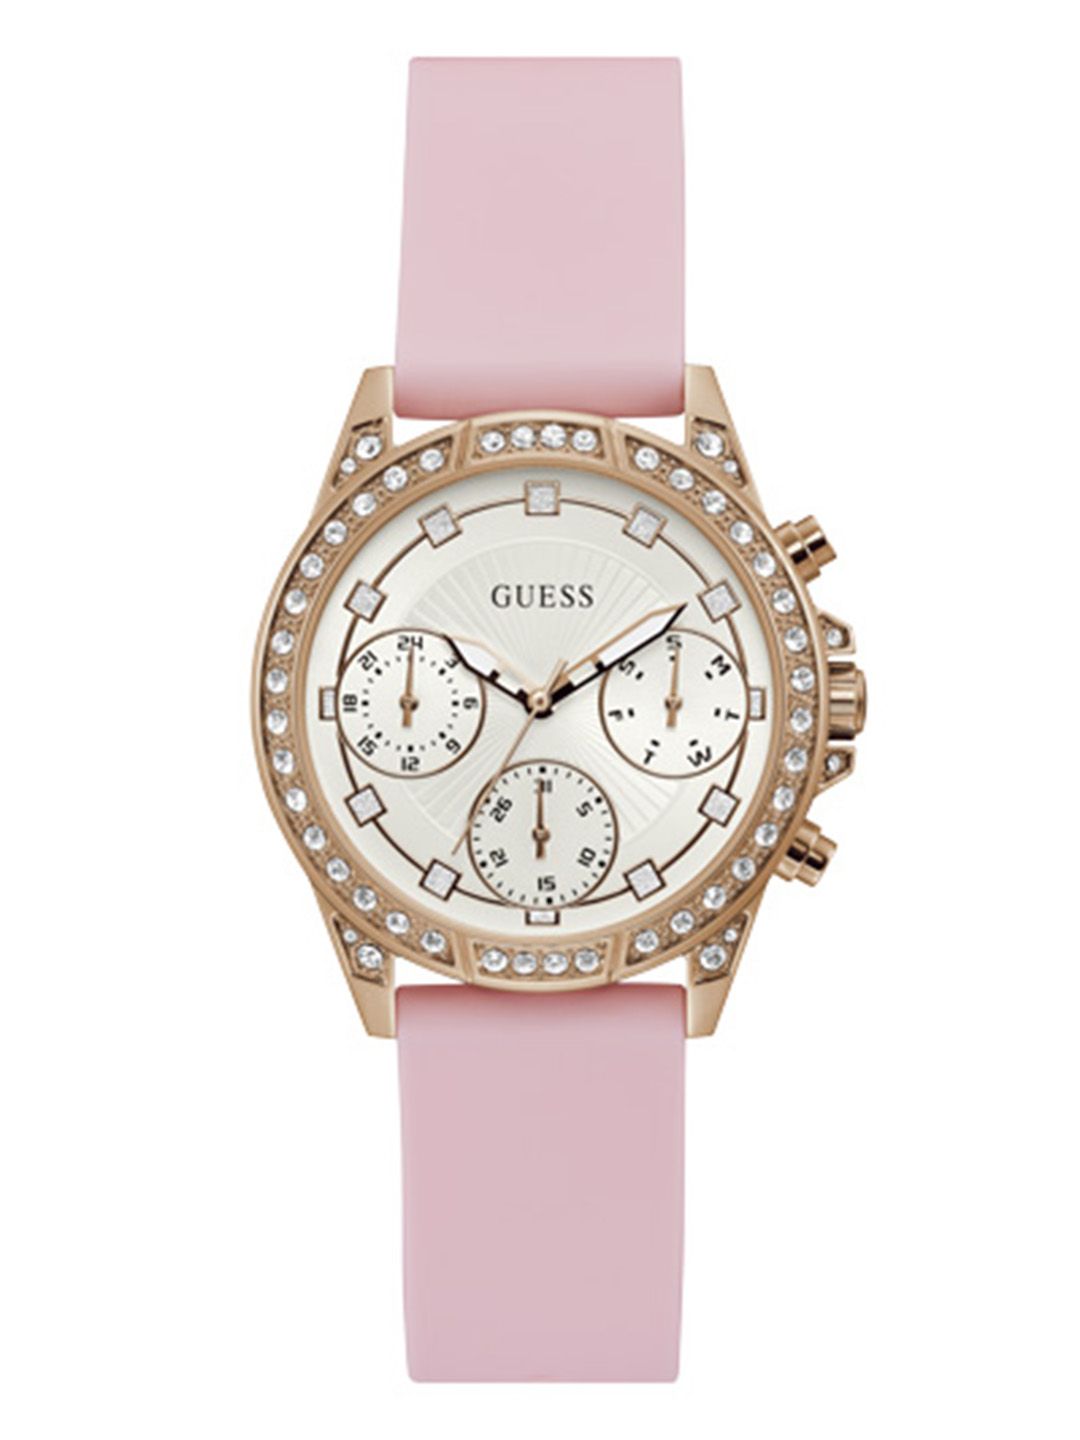 GUESS Women White Analogue Watch GW0222L3 Price in India